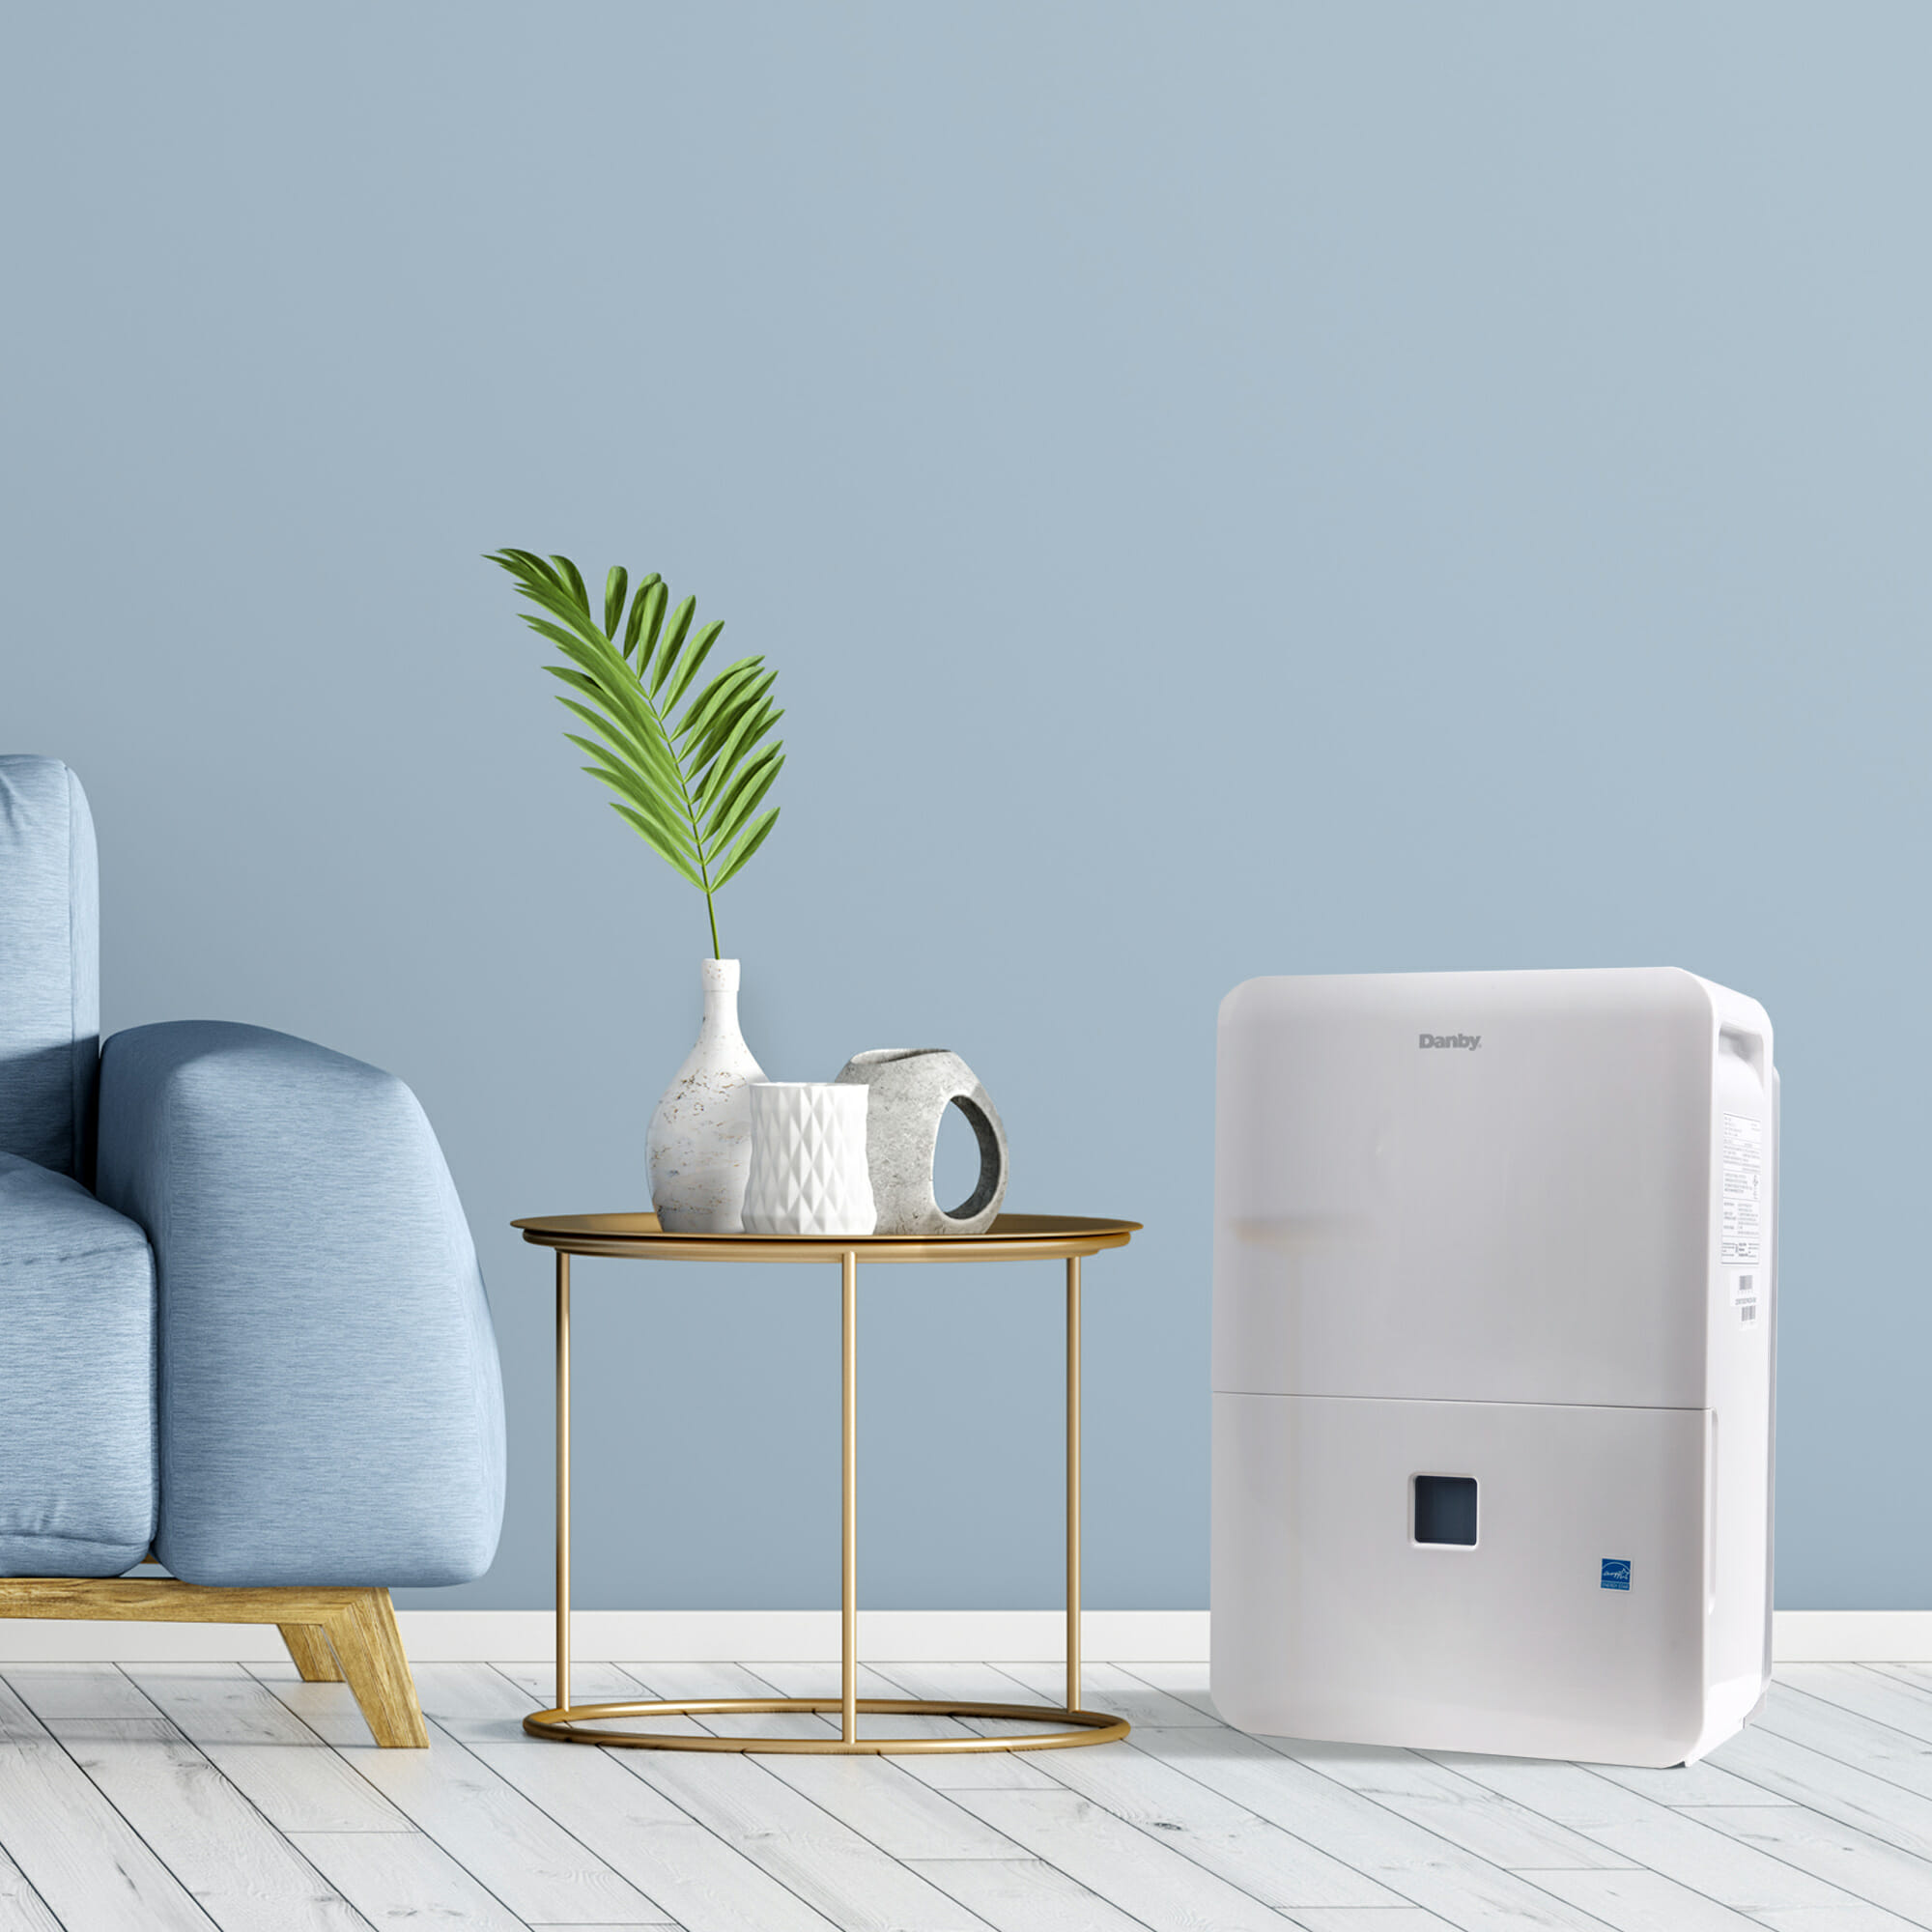 Danby Portable Air Conditioner Won'T Turn on